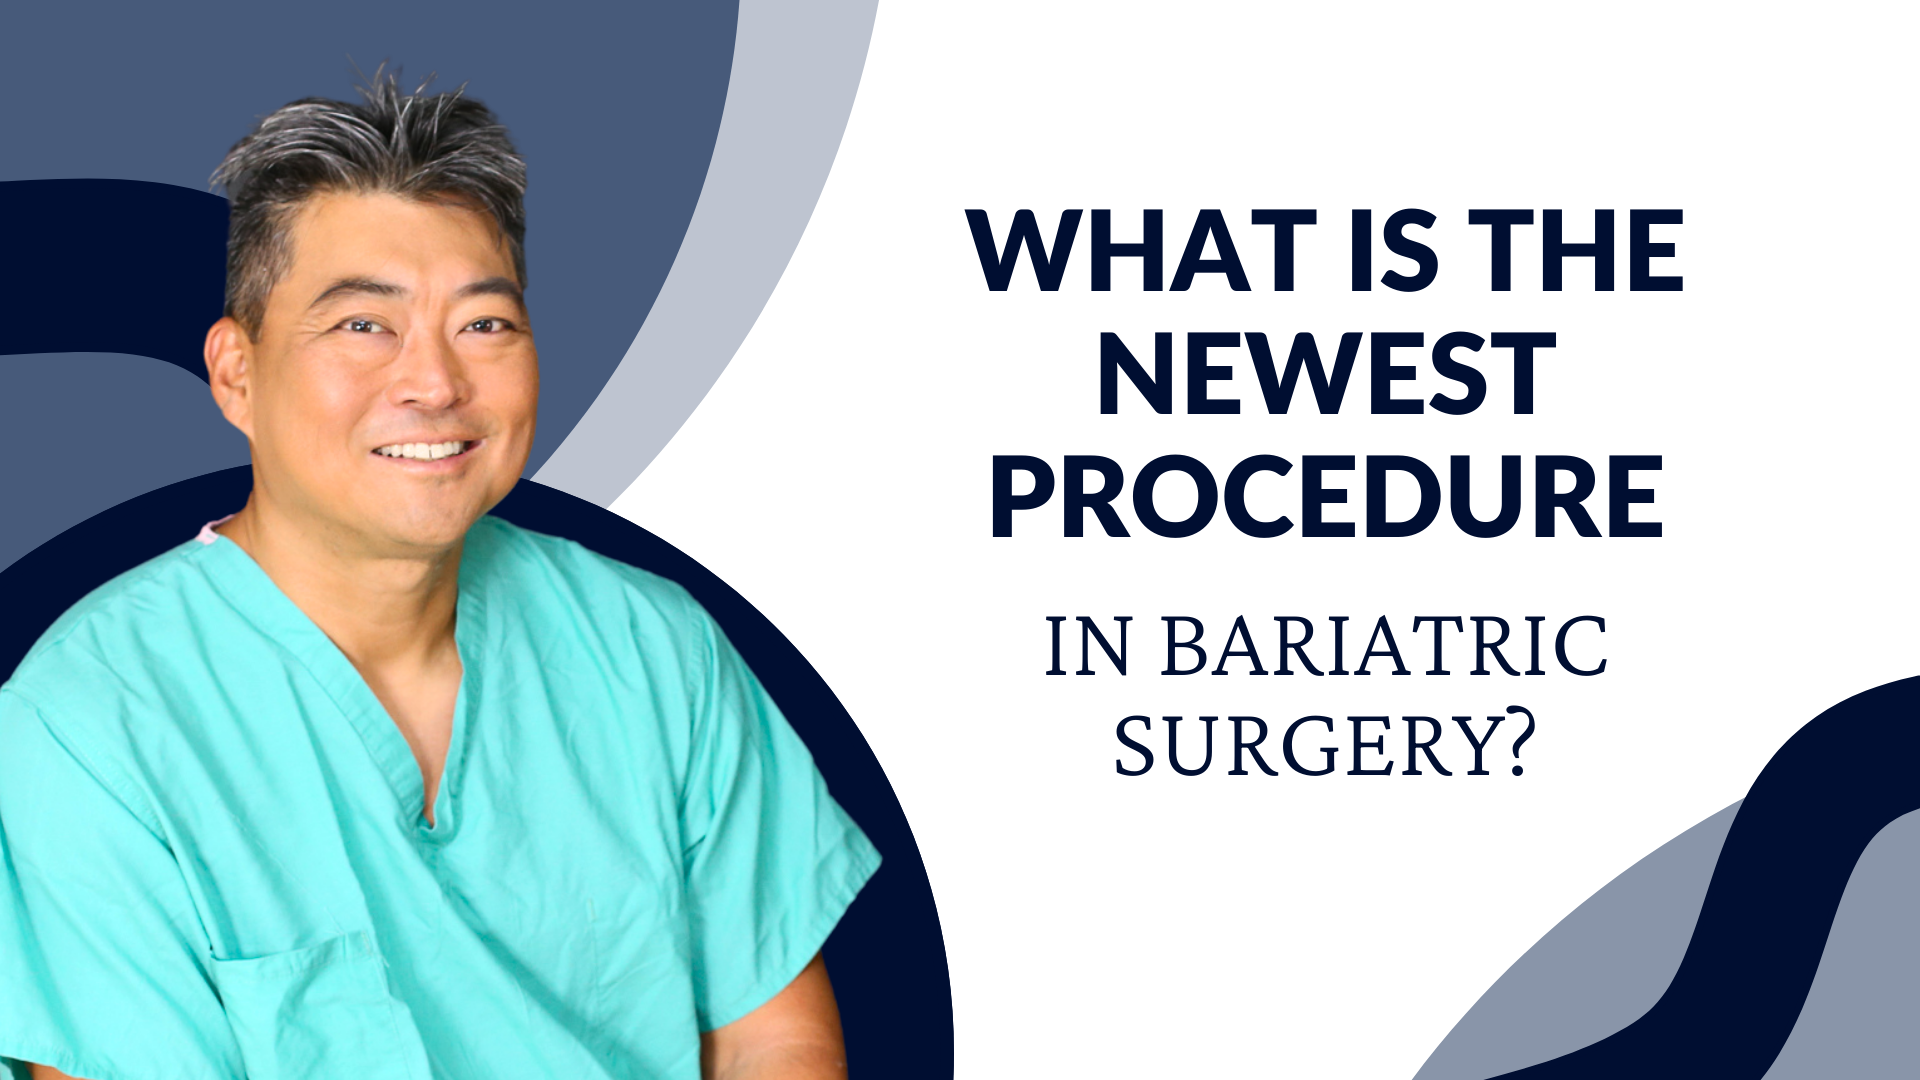 What Is the Newest Procedure in Bariatric Surgery